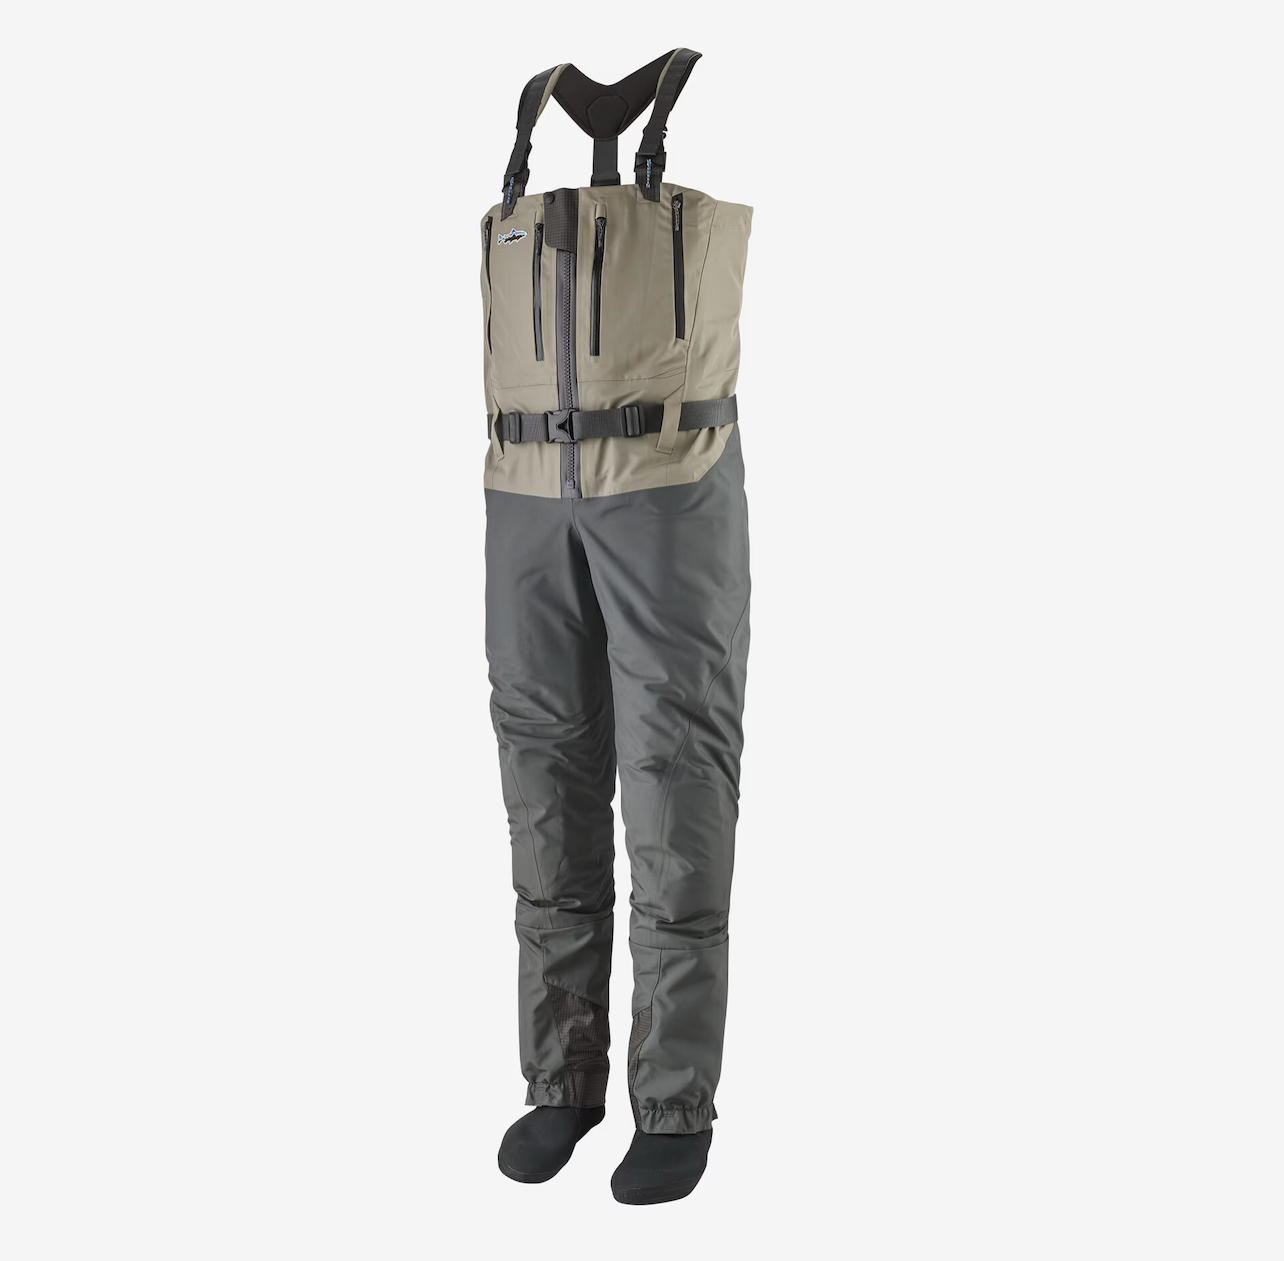 PATAGONIA M'S EXPEDITION ZIP FRONT WADER - RIVER ROCK GREEN - XRL